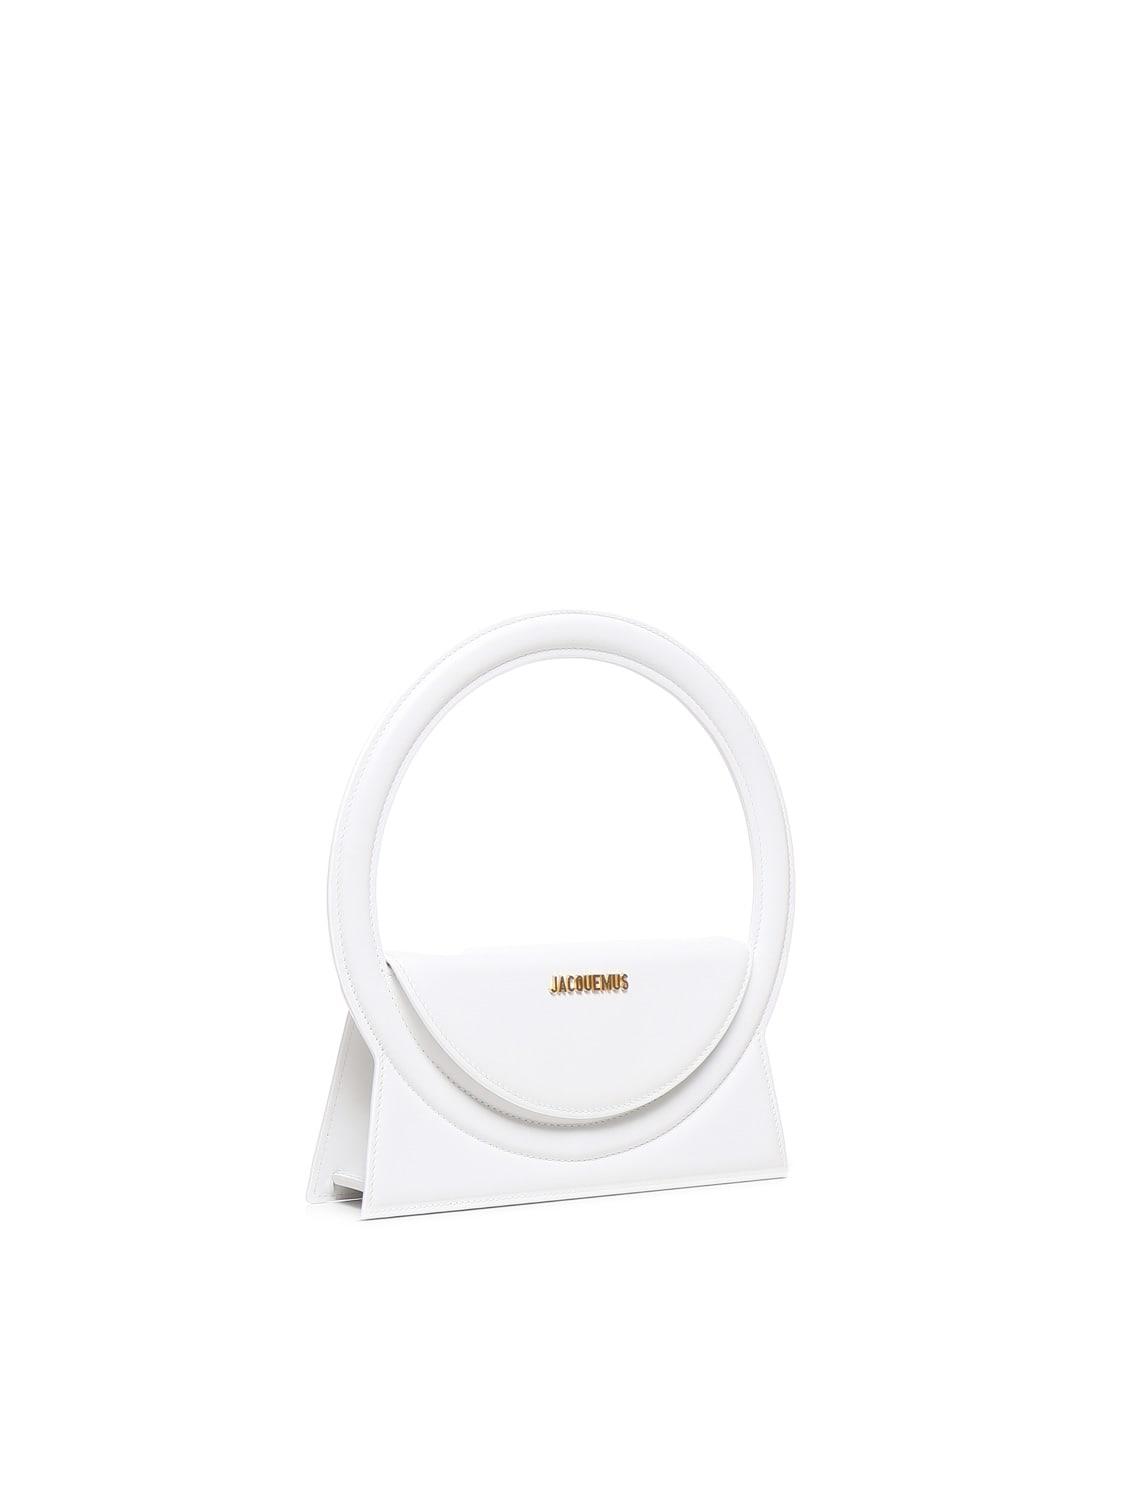 Jacquemus Le Sac Rond in White | Lyst UK